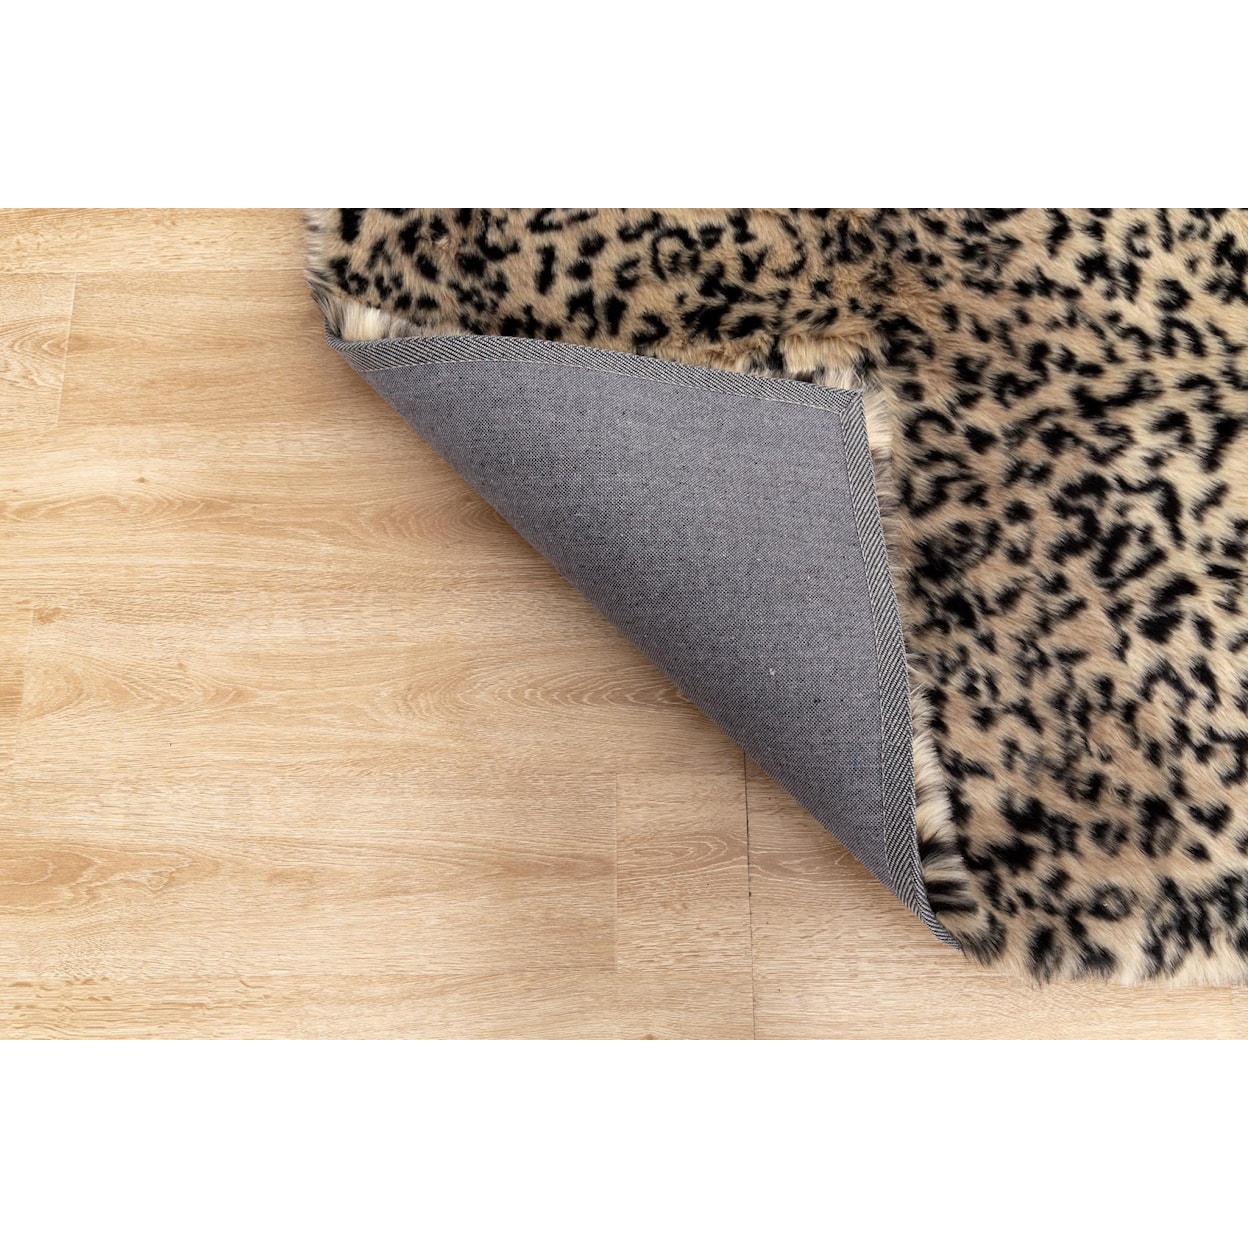 MDA Rugs Luxury Collection LUXURY 5X7 FAUX LEOPARD AREA RUG |